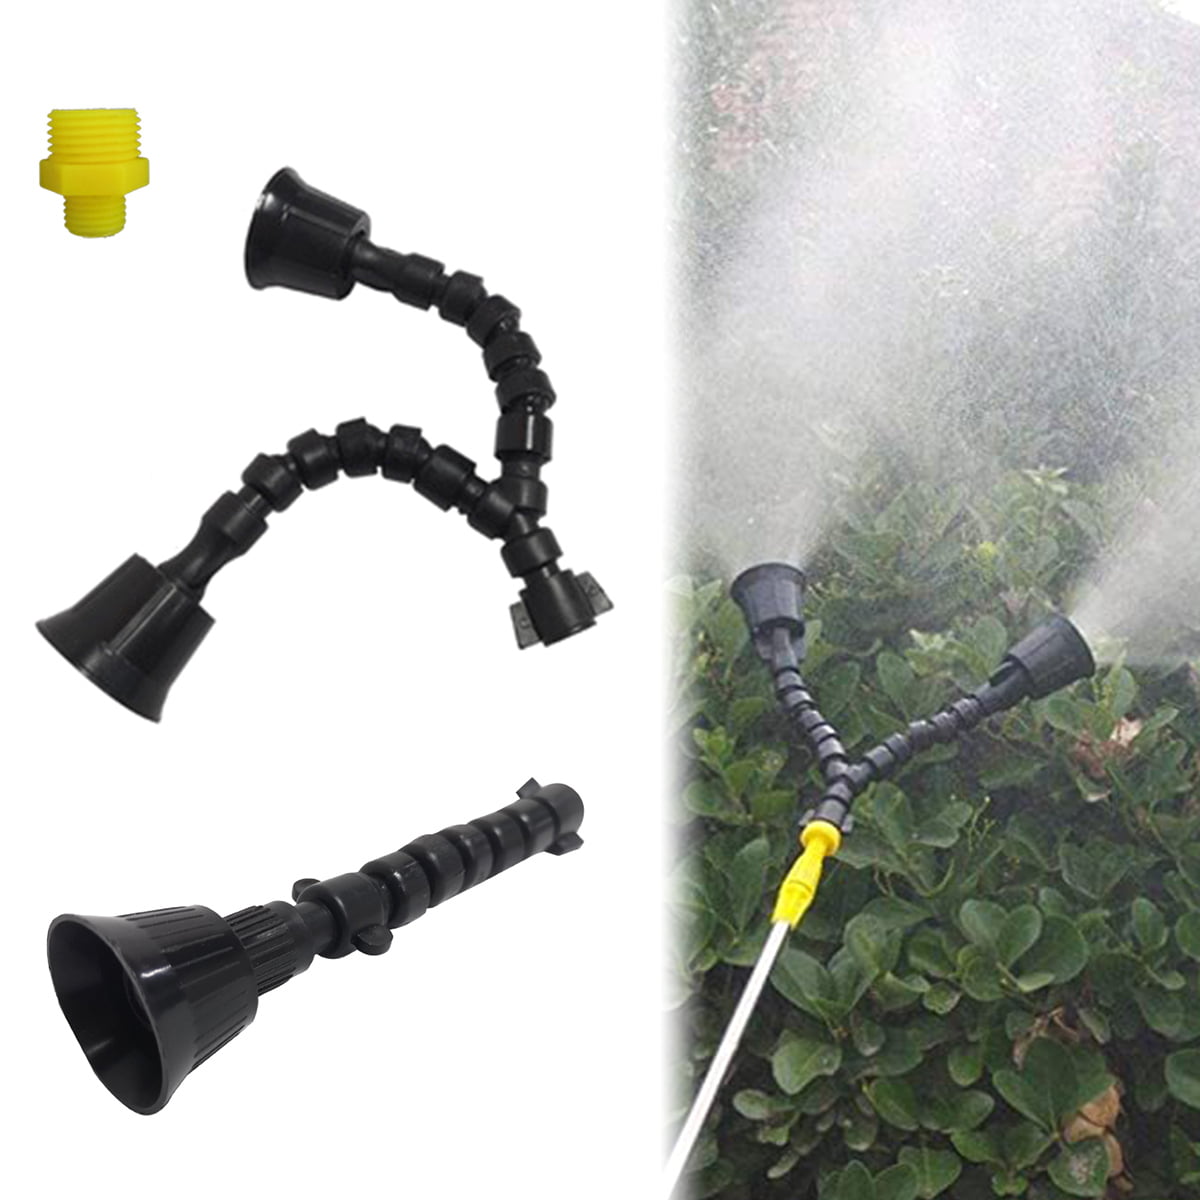 Lawn Water Sprinklers Nozzle Yard Irrigation System Covering Large Area 